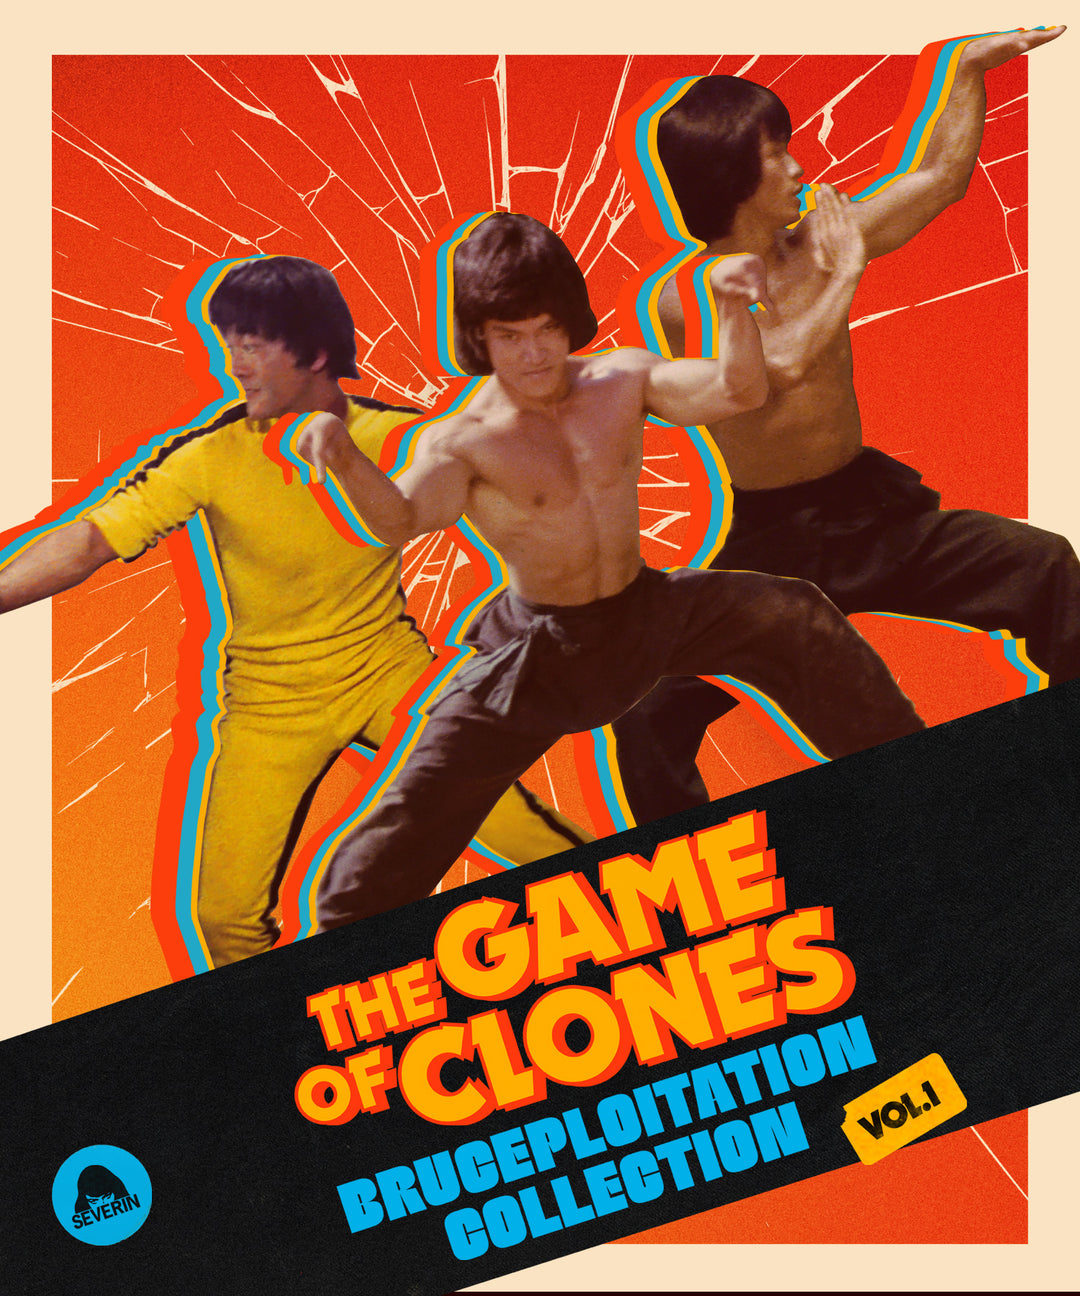 The Game of Clones: Brucesploitation Collection Vol. 1